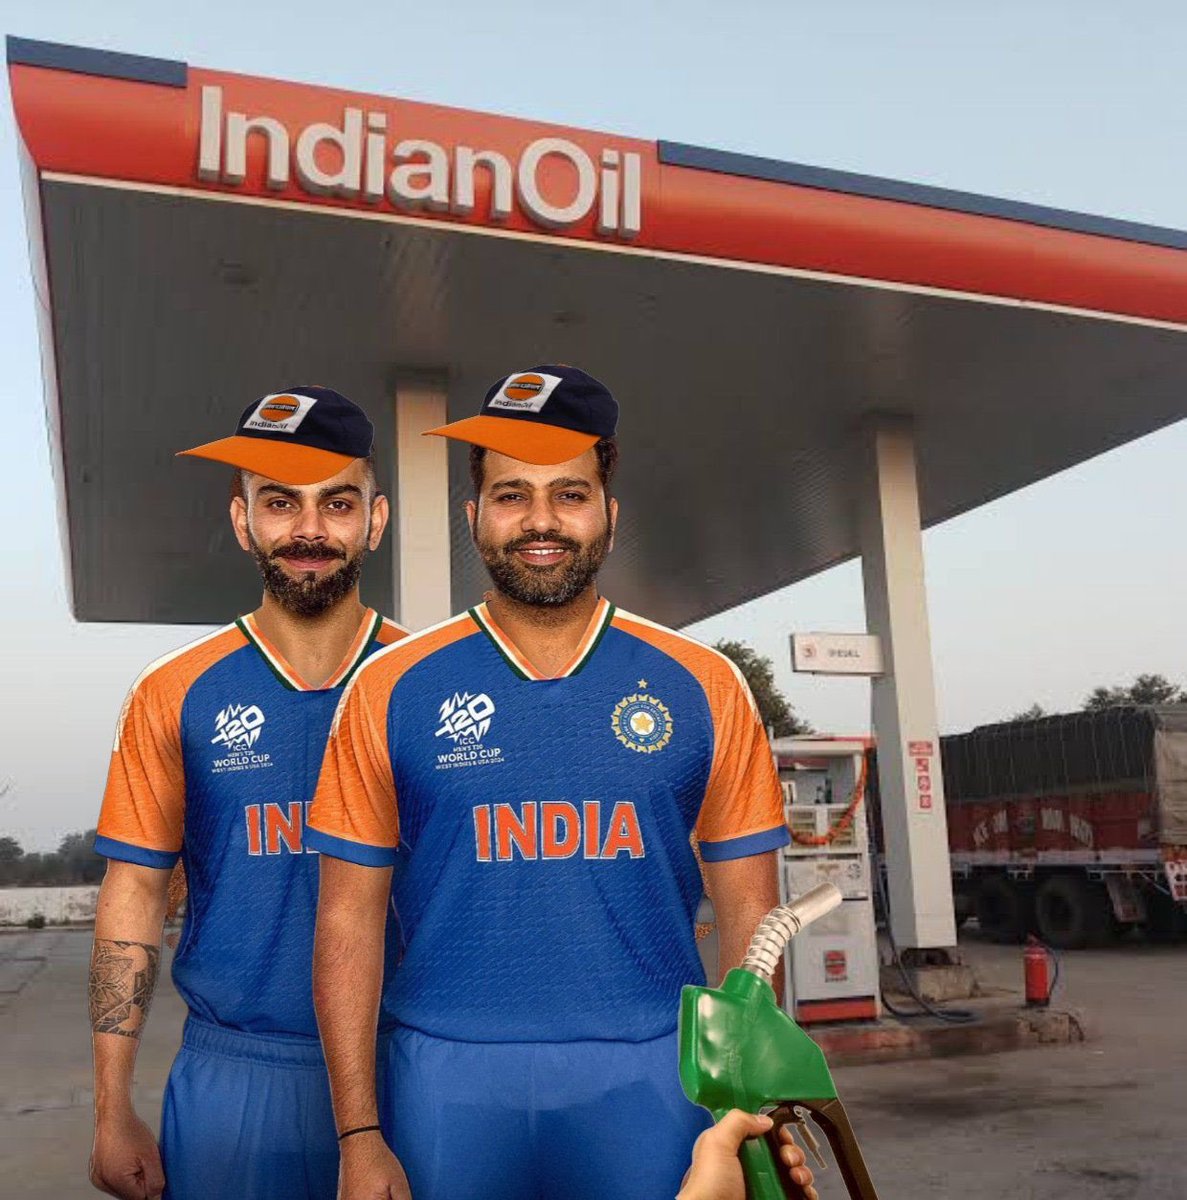 Bro 😂😂 wtf !!!

#BCCI #indiancricketteam #icc #iccworldcup  #indianoil @IndianOilcl @BCCI